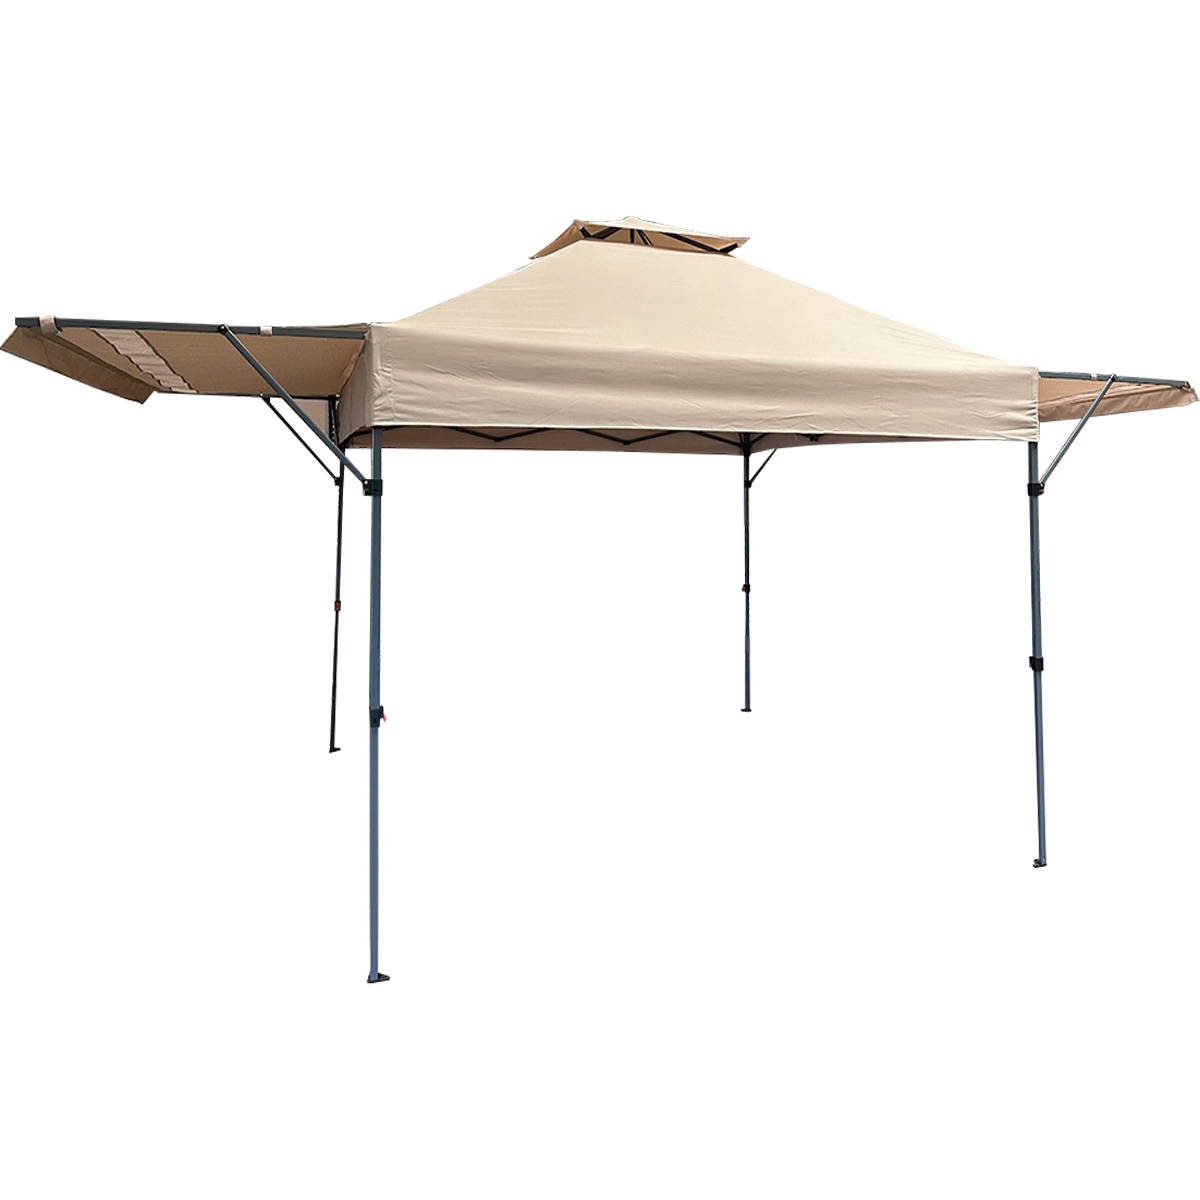 Replacement Canopy for Eagle Peak 10x17 Instant Shelter Tent